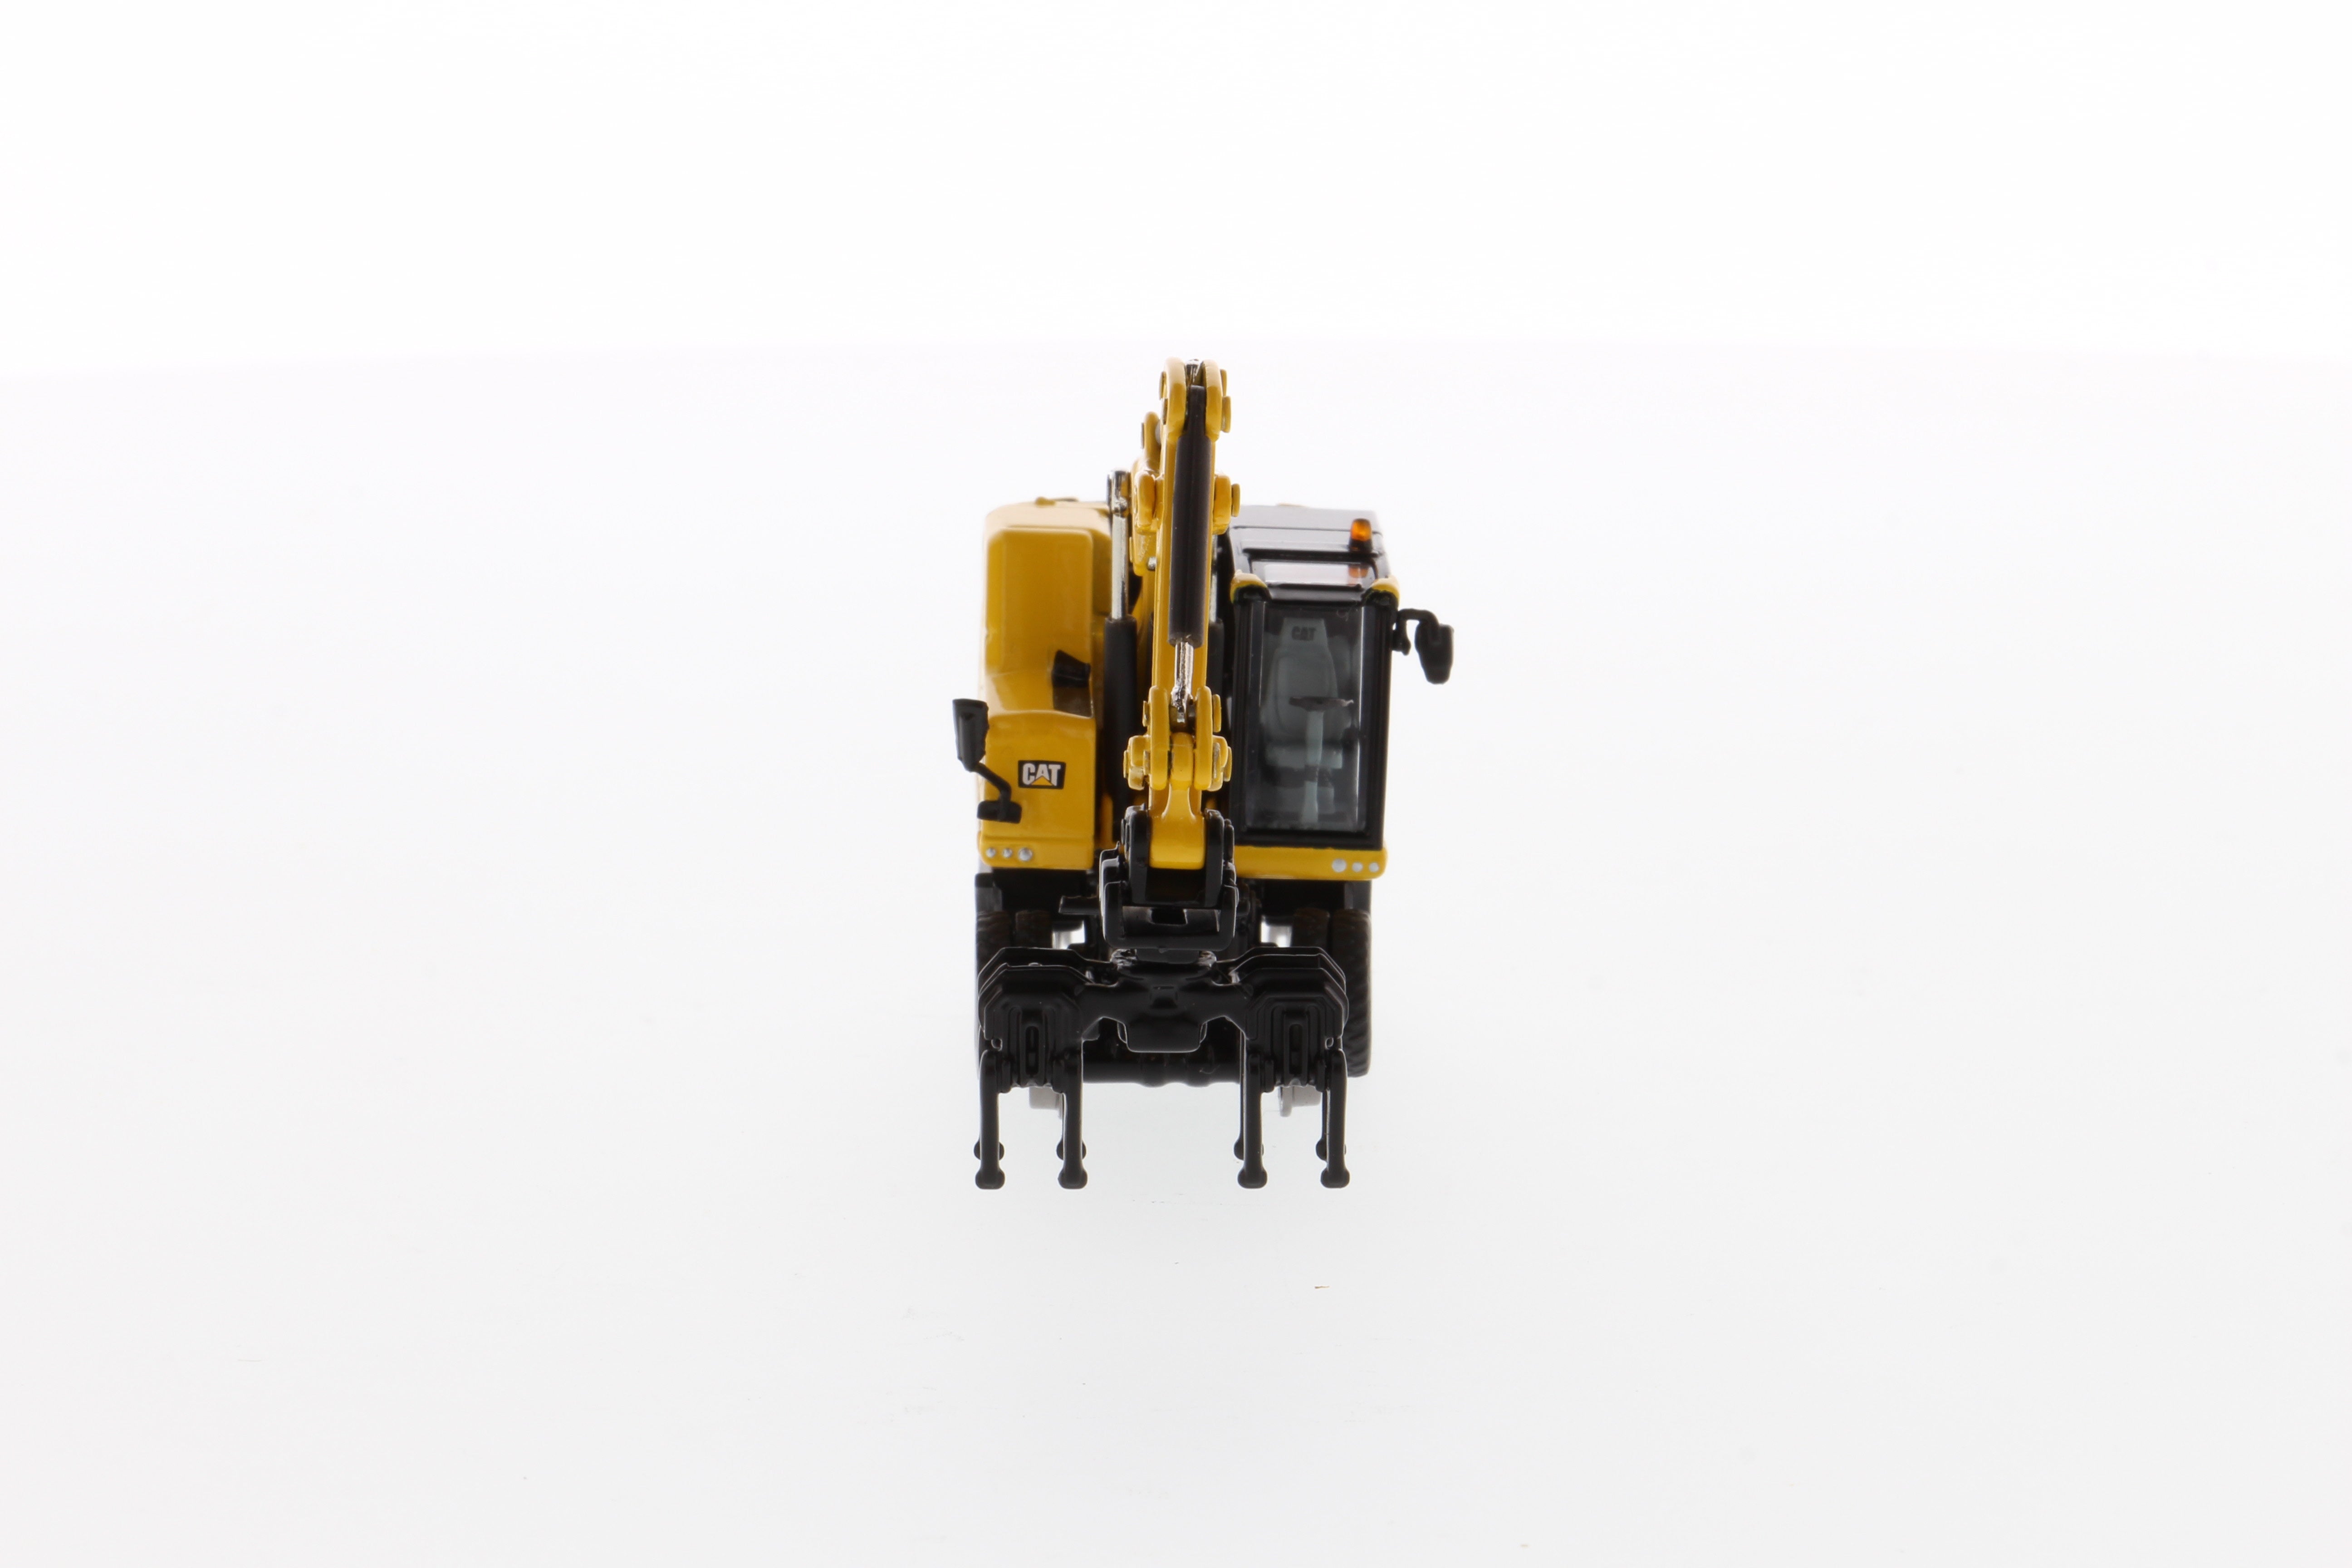 CAT Die Cast M323F Railroad Wheeled Excavator Safety Yellow Colour 1:87